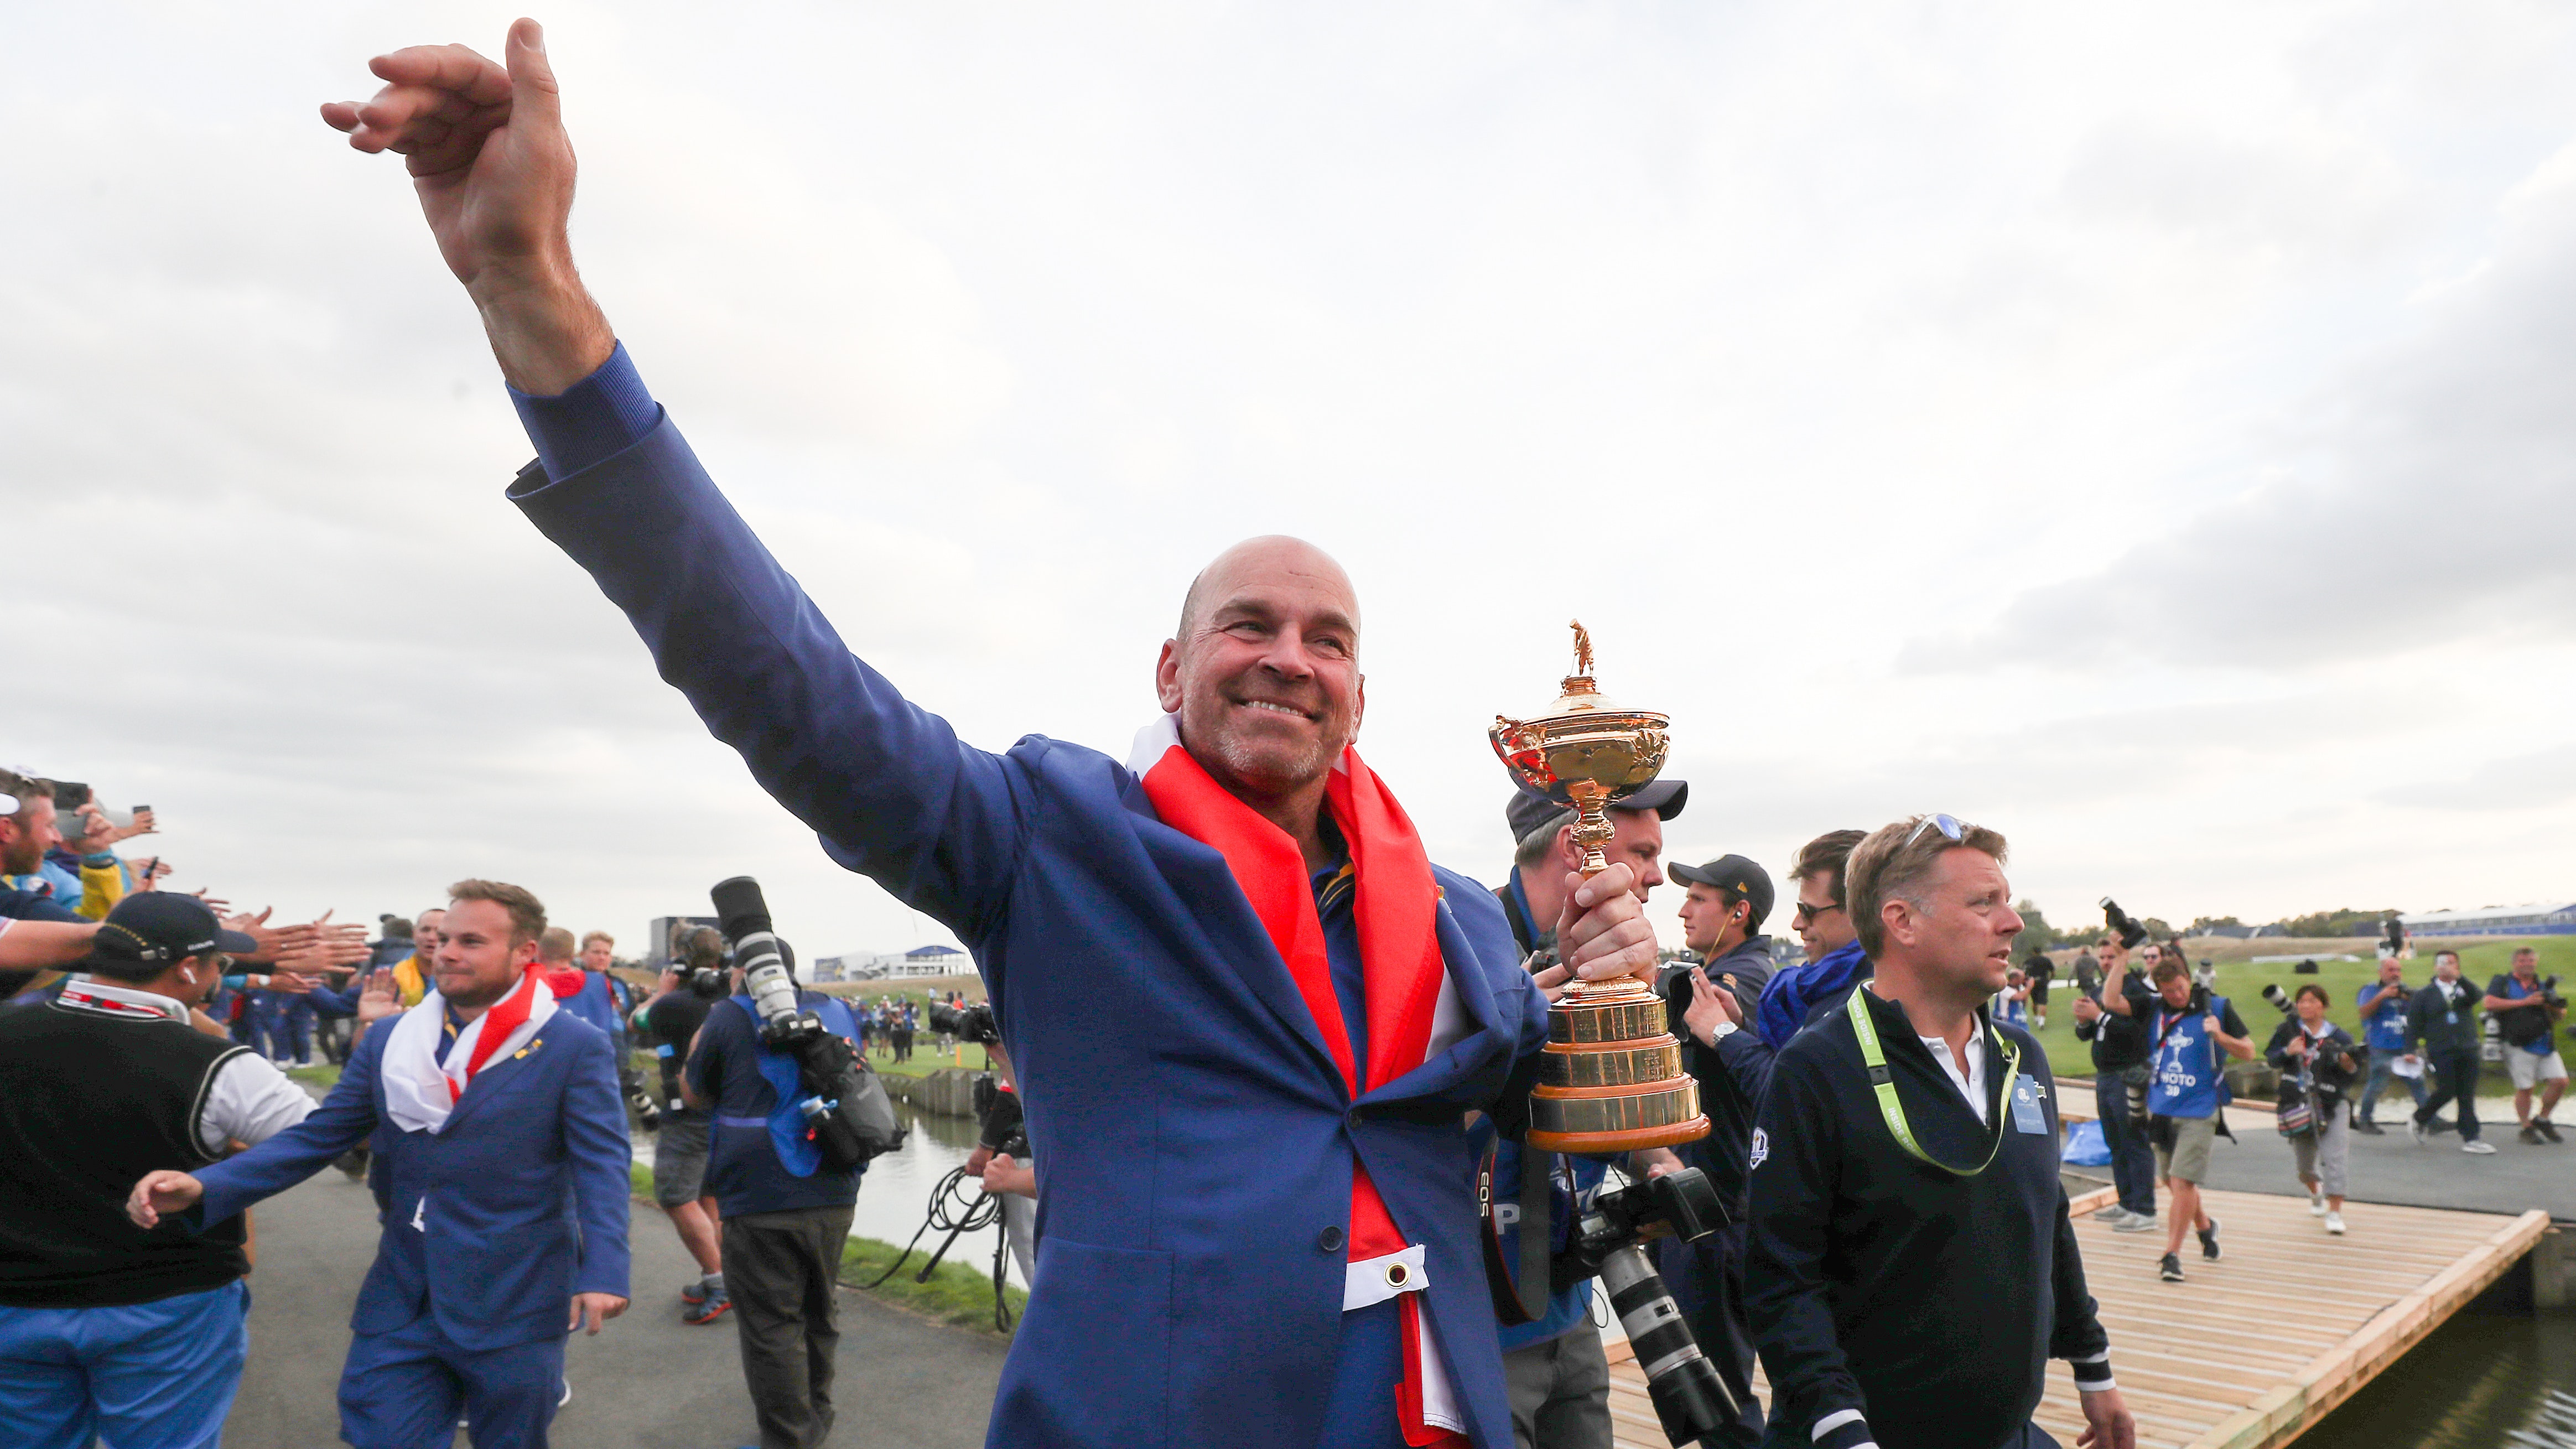 Thomas Bjorn is getting a TATTOO of the 2018 Ryder Cup scoreline! 